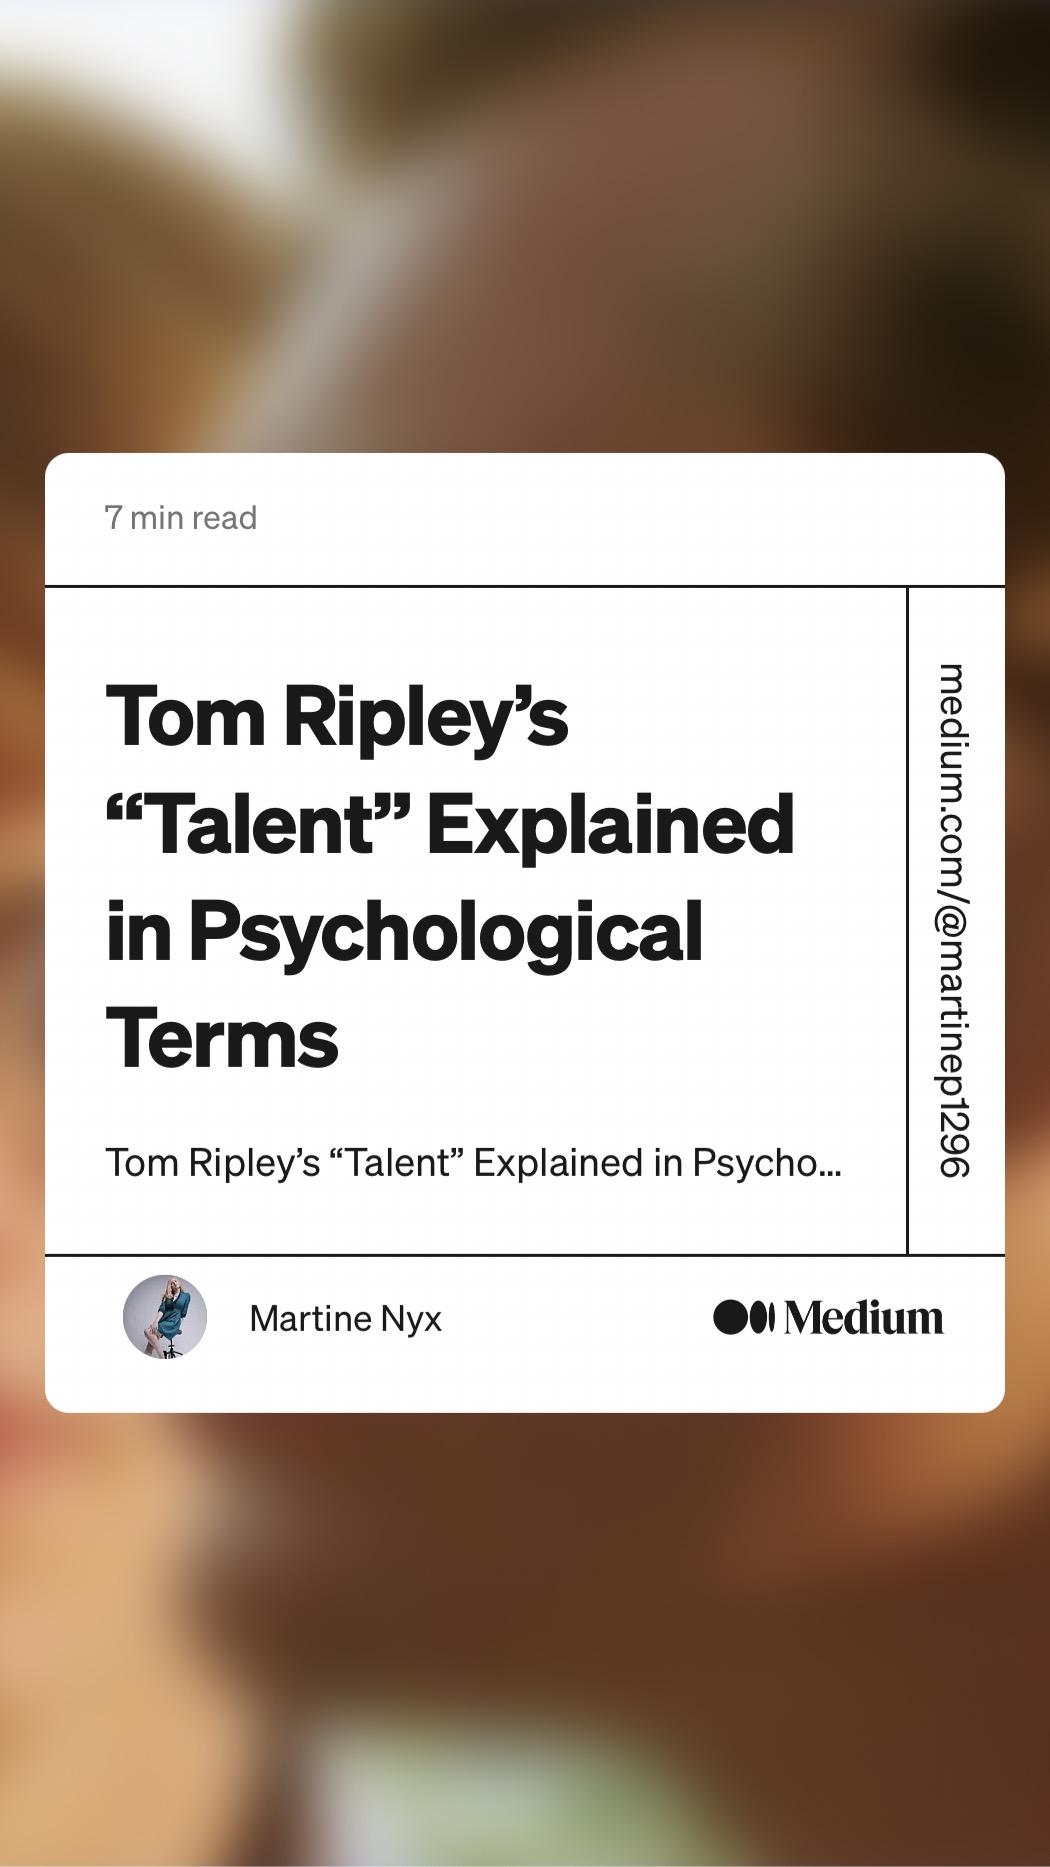 Tom Ripley’s
“Talent” Explained
in Psychological
Terms

   
     
   
  

96gLdauleWw®/ Woo wnipaw

Tom Ripley’s “Talent” Explained in Psycho...

-

 

 
  

&amp; Martine Nyx @0 Medium